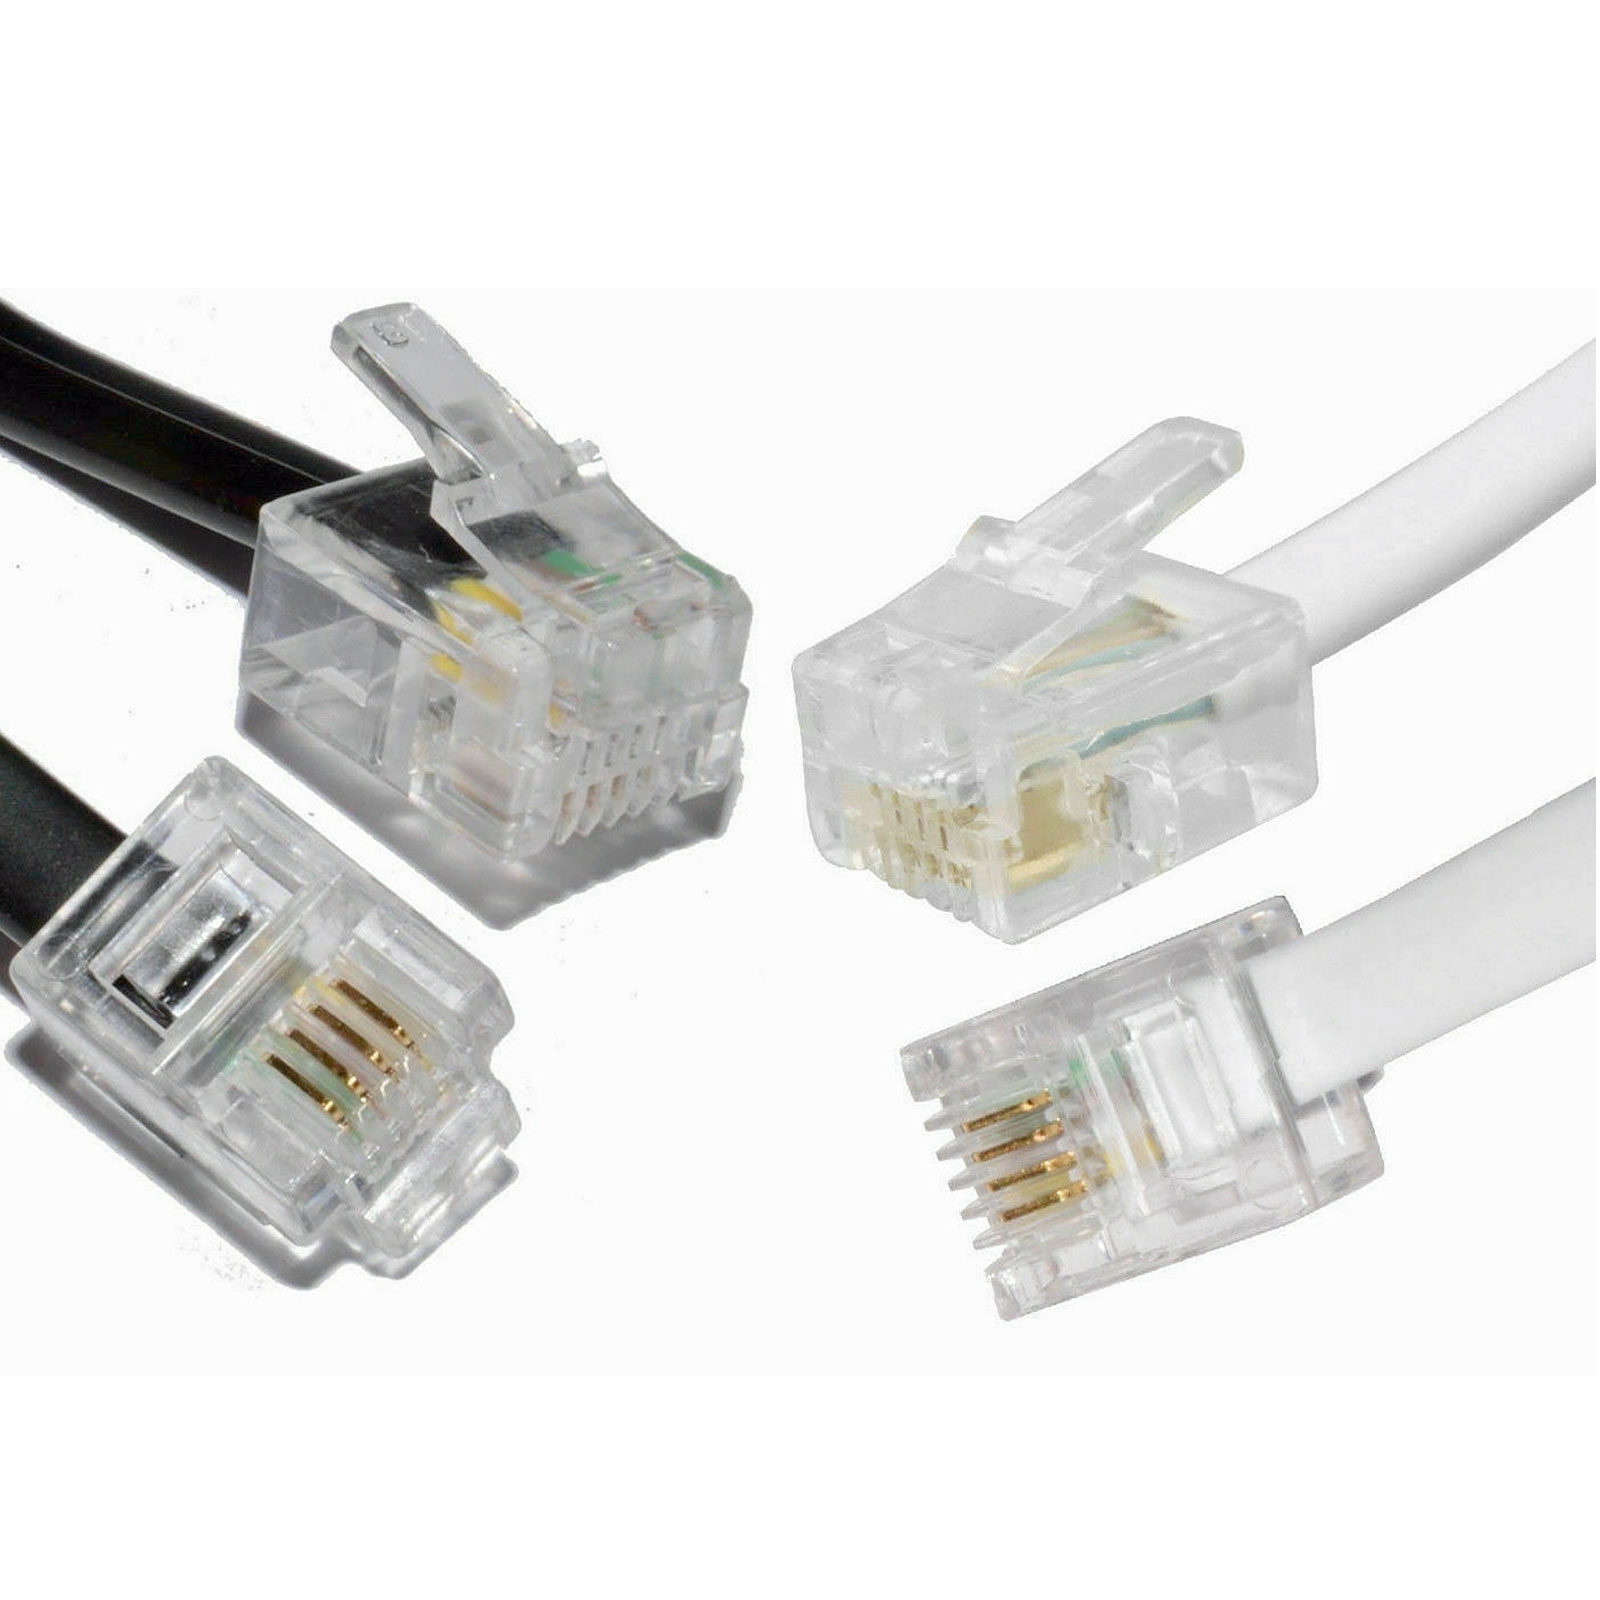 RJ11 to RJ11 ADSL High Speed Modem Router Cable Sky Broadband BT Phone Lead